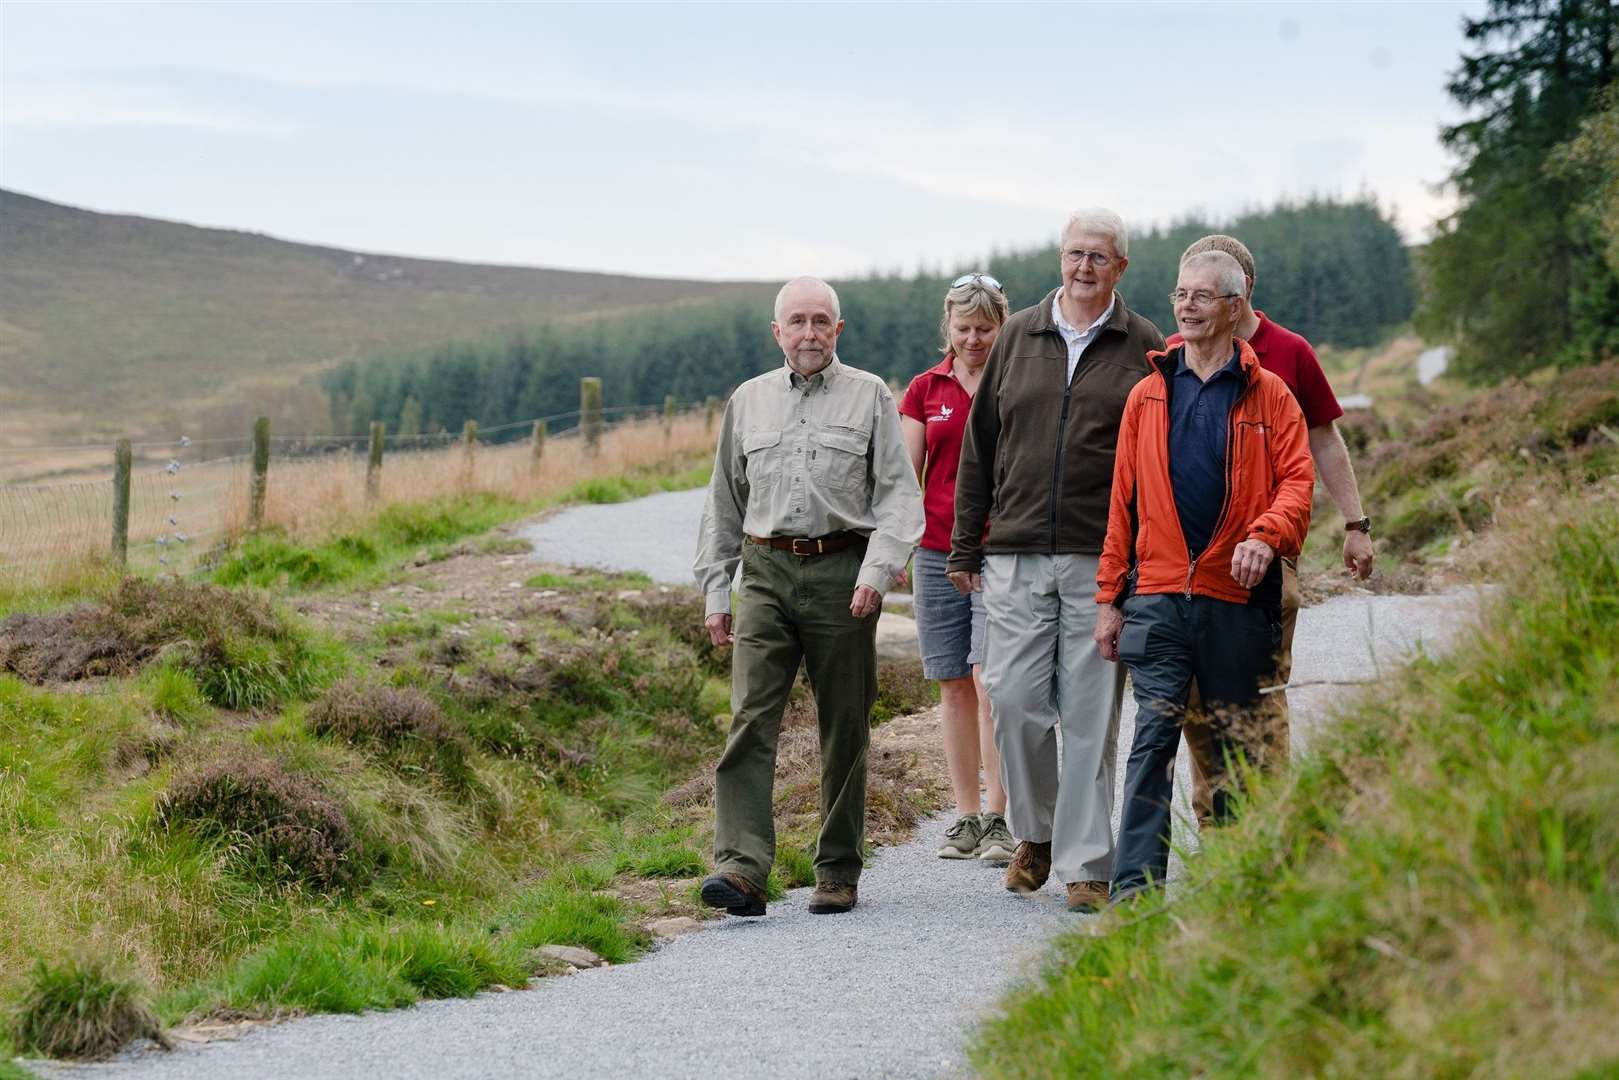 Enjoying the newly upgraded Speyside Way Spur: (from l to r) Steve Smith and Elspeth Grant of TGLP, Brian Fowler and Tony Birchall of Glenlivet Walking Group and Grant Moir of the CNPA.